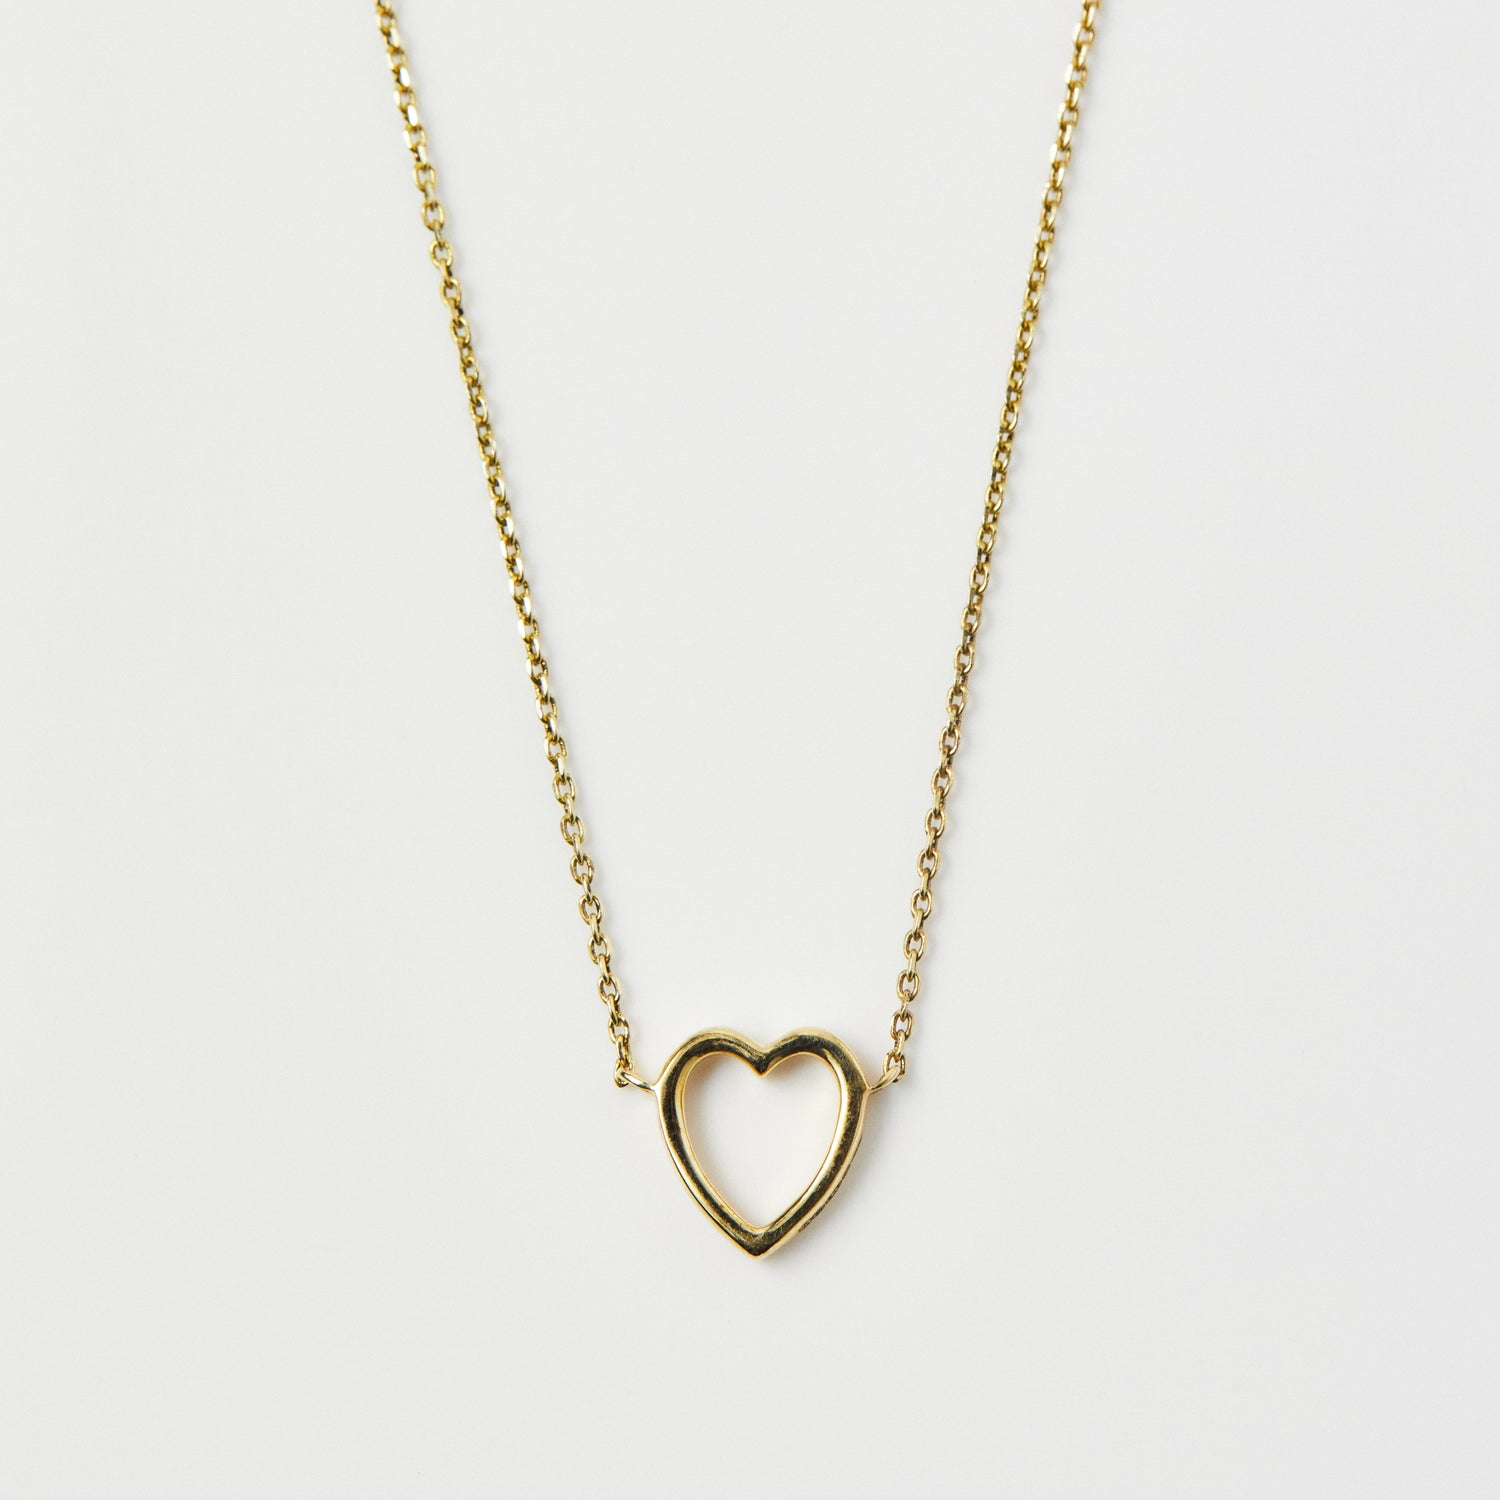 Heart Necklace In 9k Solid Gold - Necklace - Carrie Elizabeth